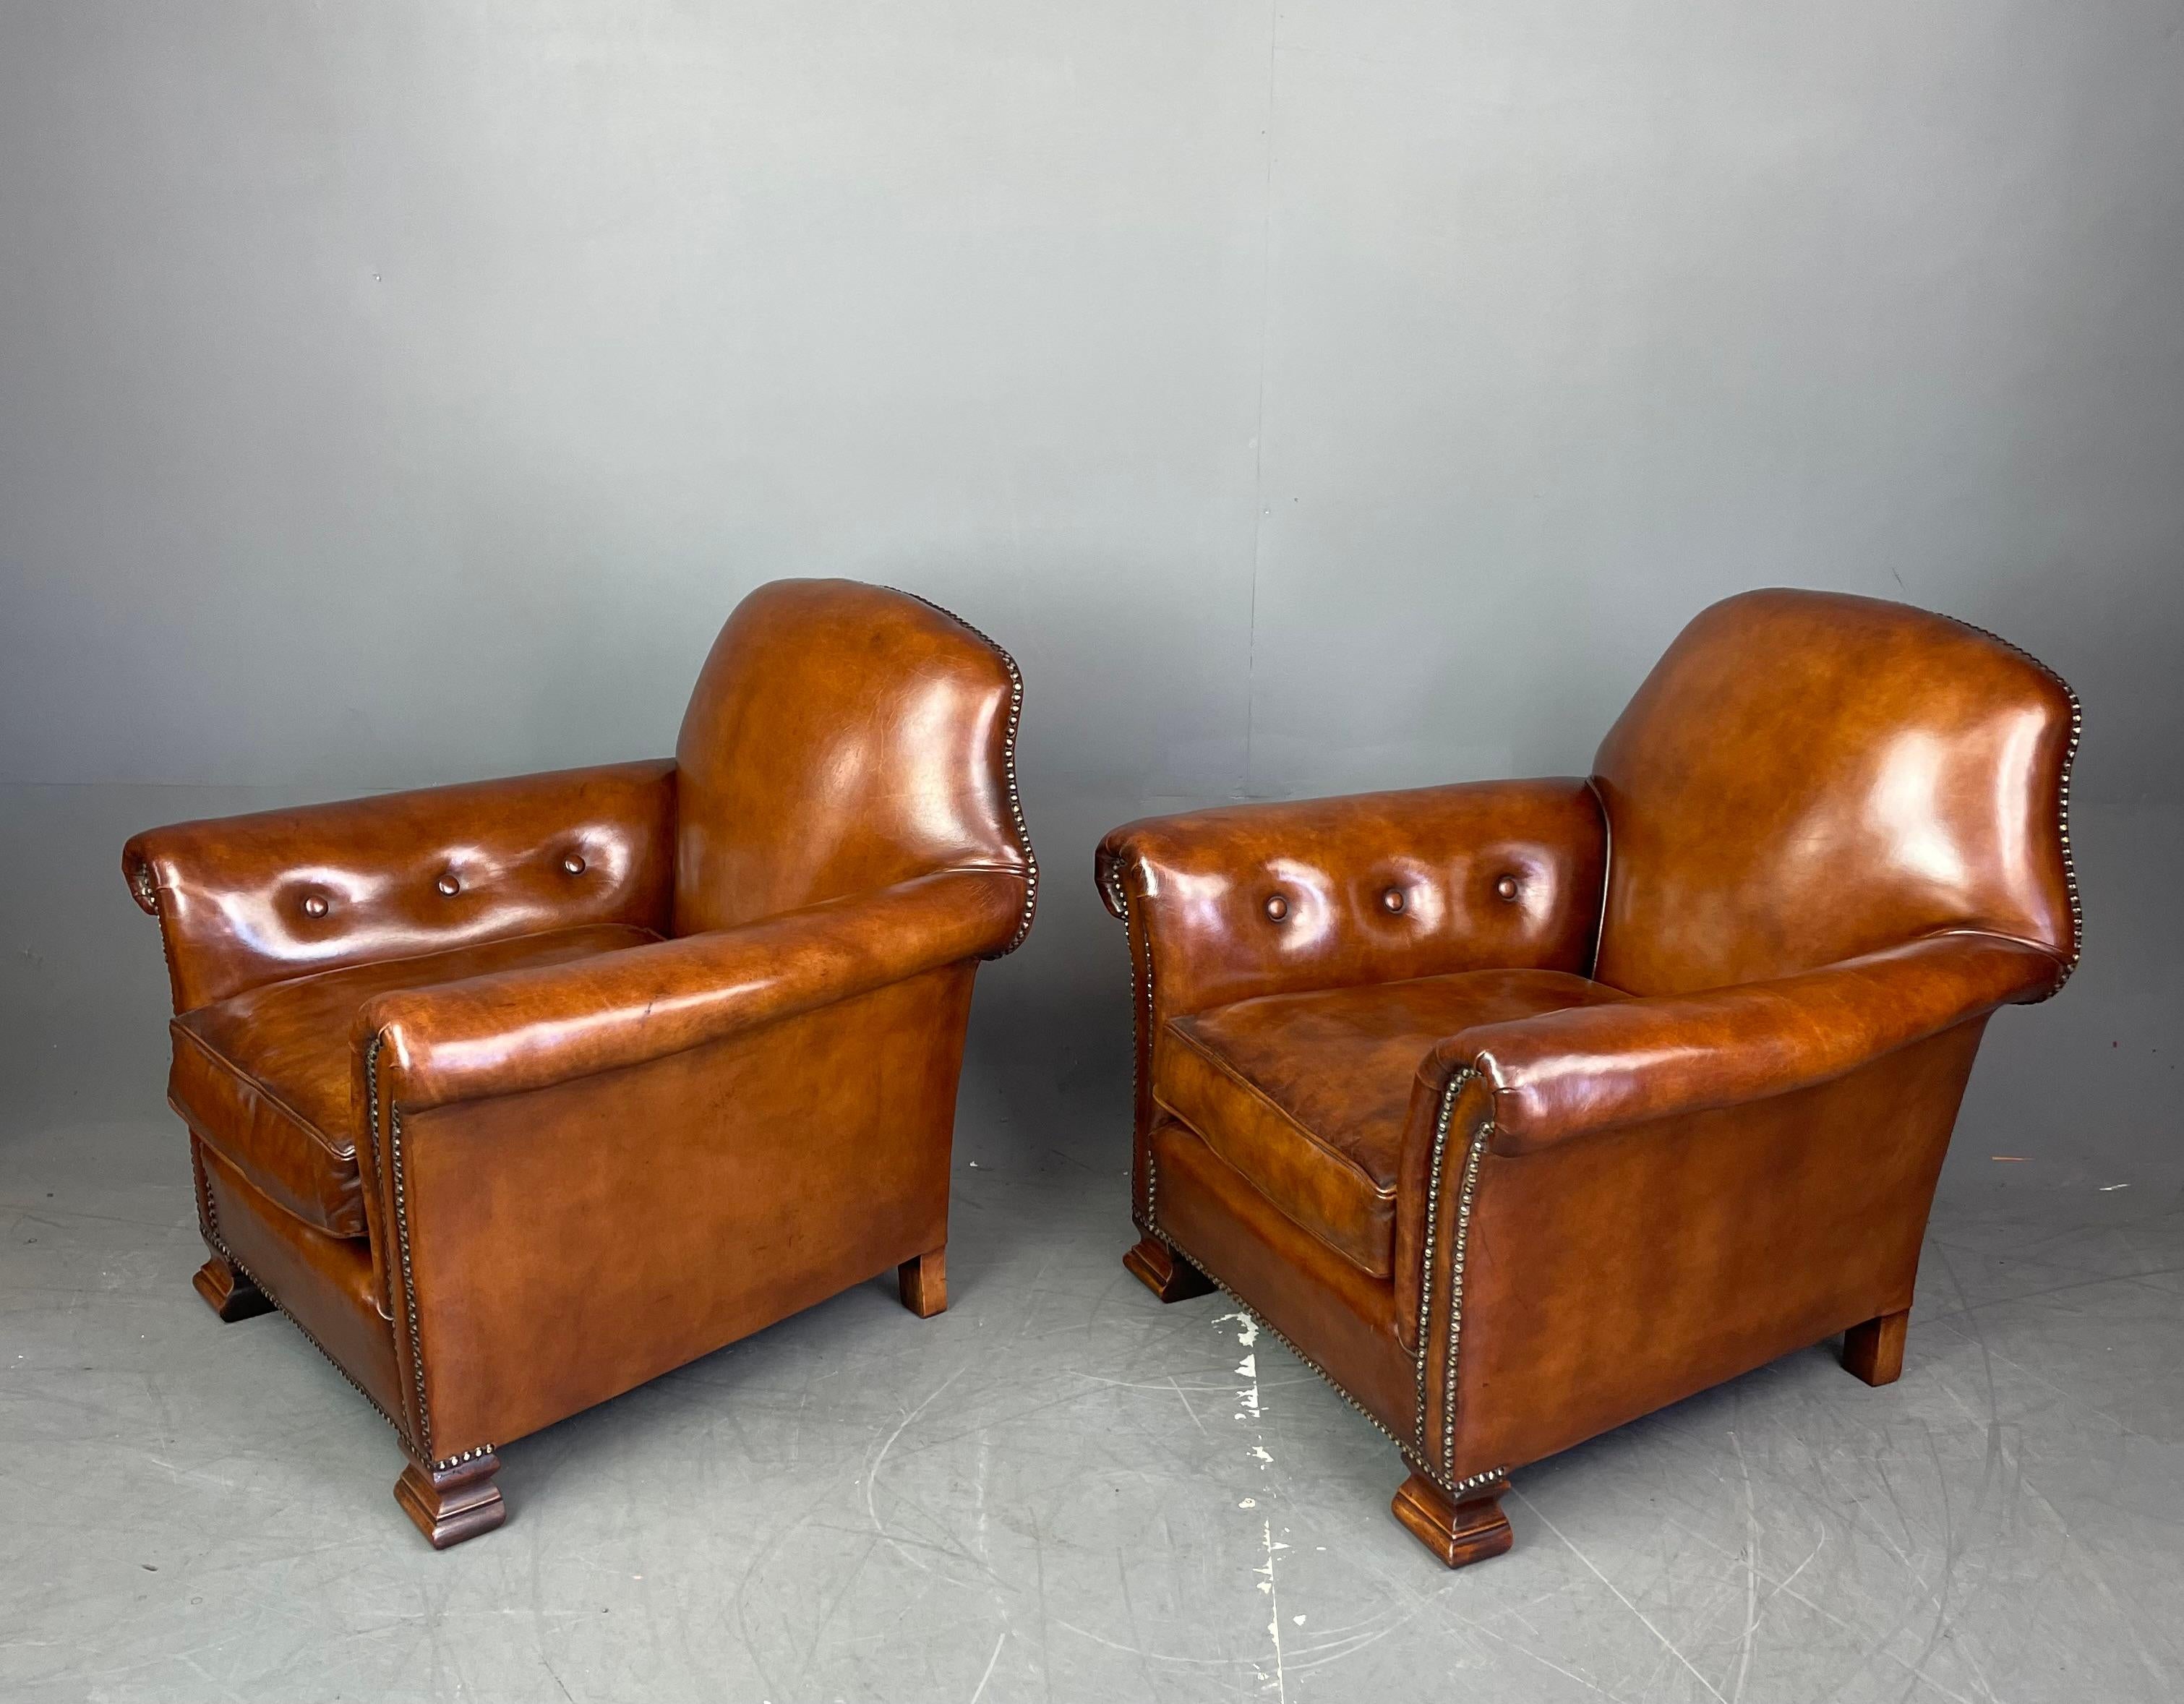 Fine pair of Edwardian leather arm chairs .
They have been fully refurbished to the highest of standards and are upholstered in the finest English leather .
They are hand dyed and finished giving a wonderful unique antique finish and a great deep